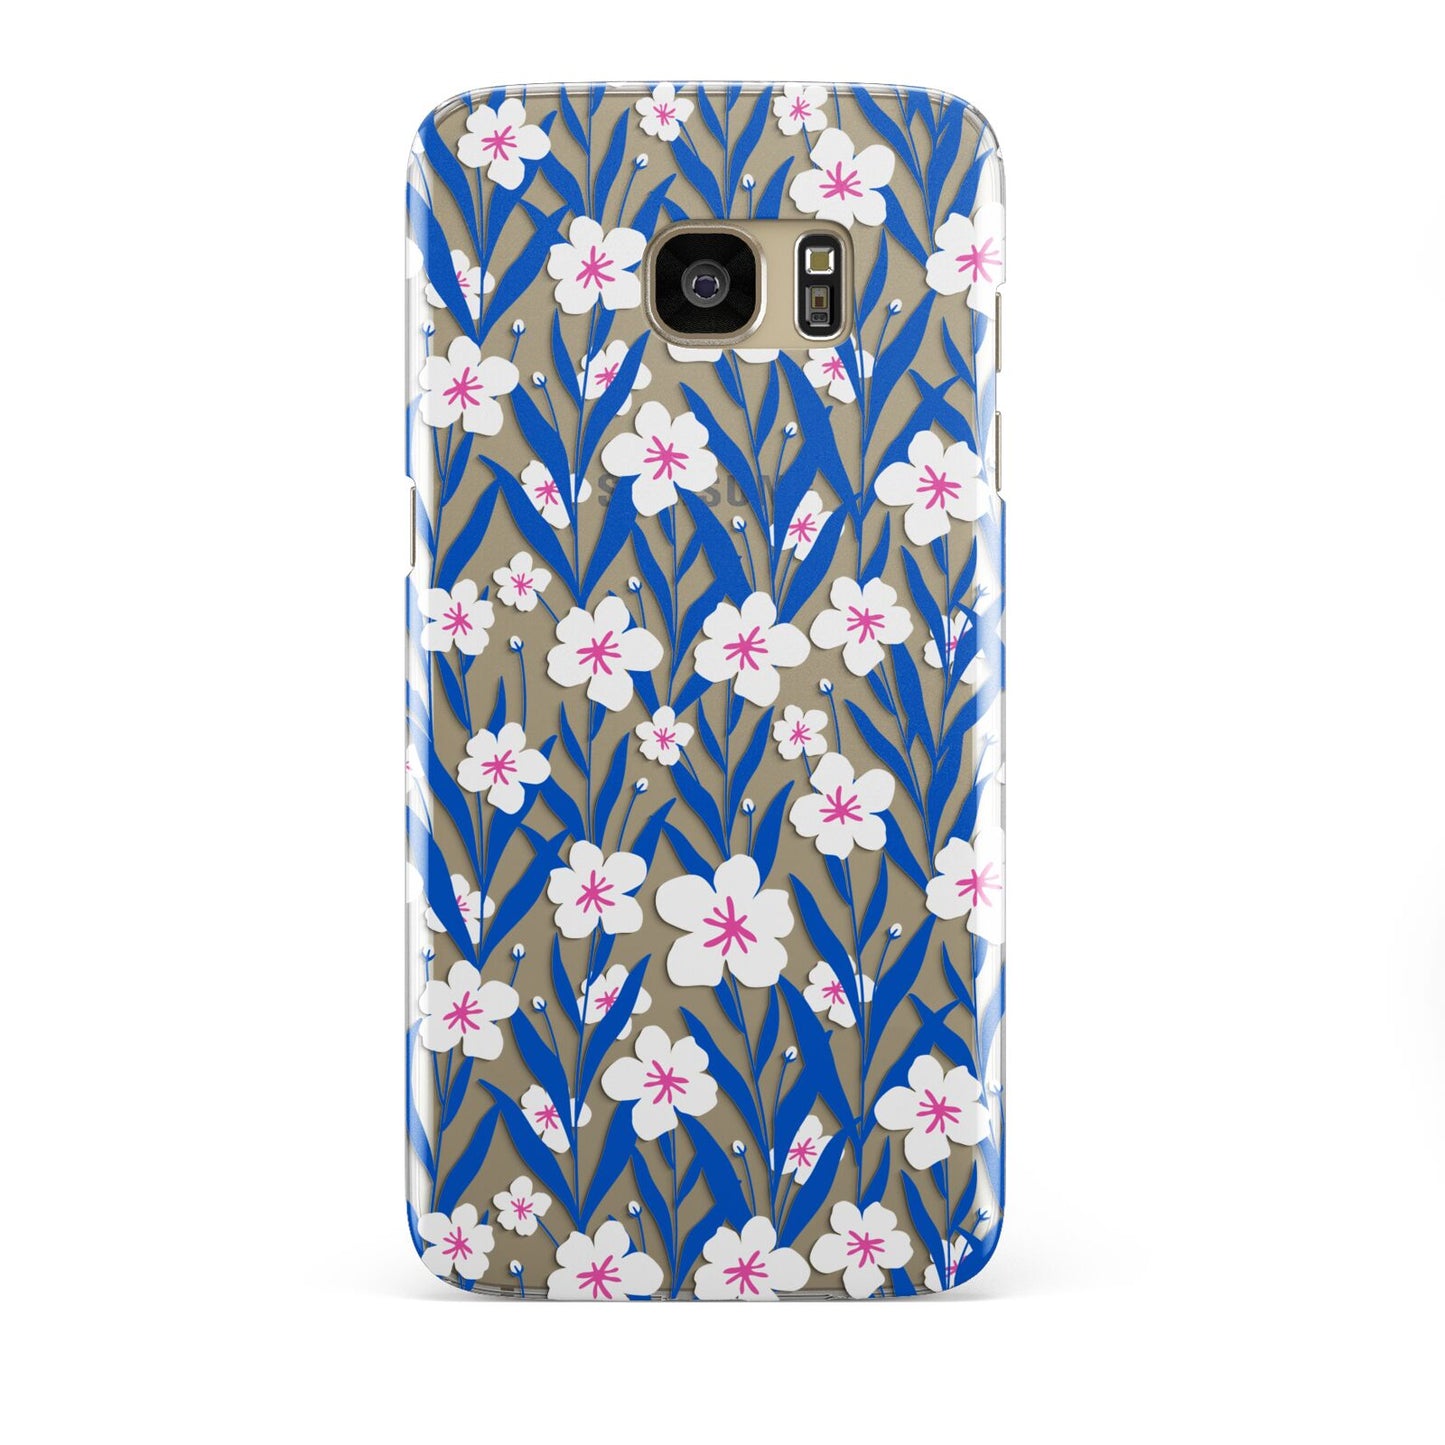 Blue and White Flowers Samsung Galaxy S7 Edge Case